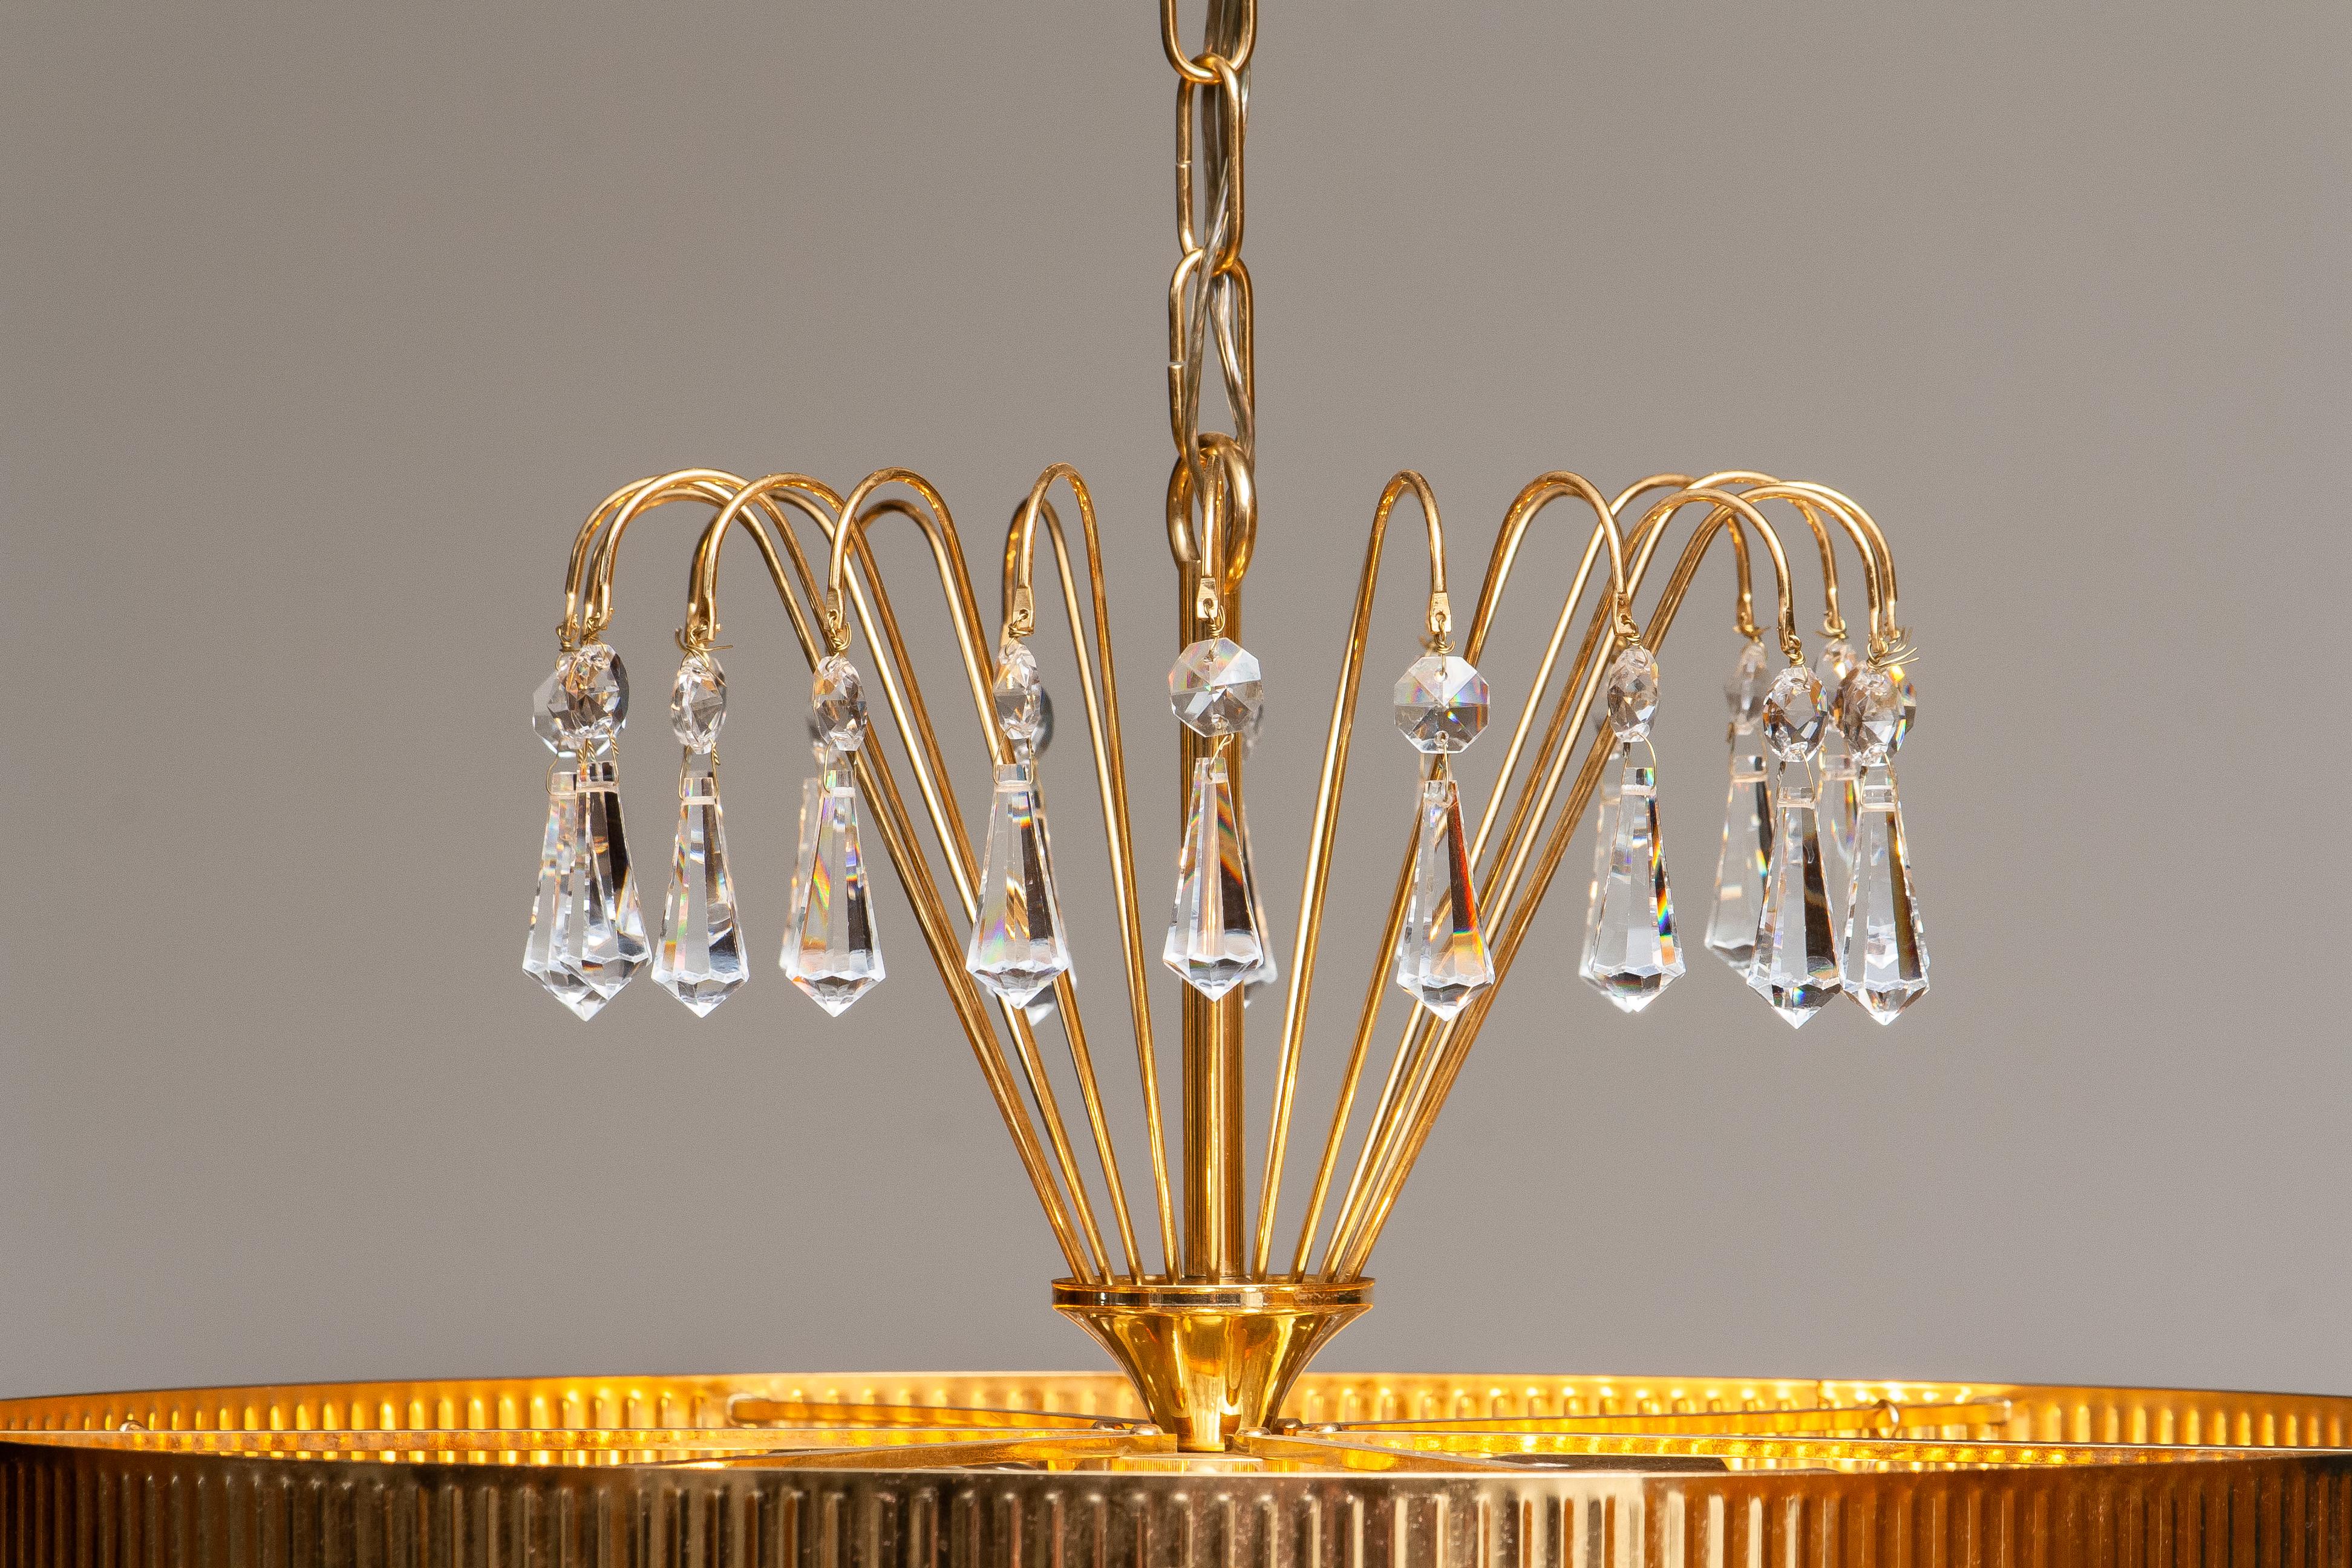 1960s, 24-Carat Gold-Plated and Faceted Crystal Chandelier by Rejmyre, Sweden 1